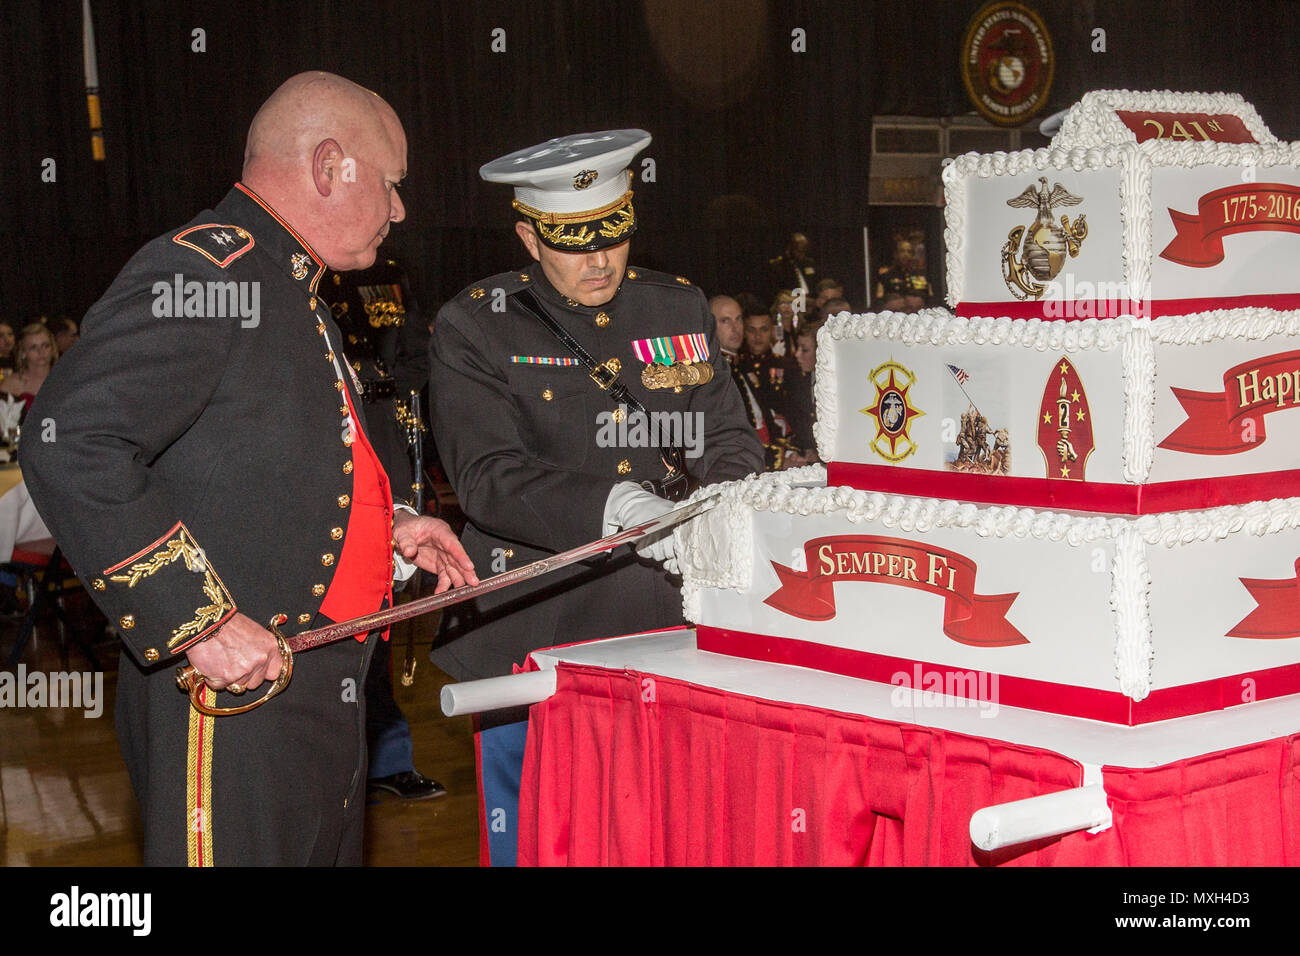 U.S. Marine Corps Maj. Gen. Walter L. Miller, Jr., commanding general of II Marine Expeditionary Force (II MEF), left, cuts a cake at the II MEF Marine Corps Birthday Ball at Marine Corps Base Camp Lejeune, N.C., Nov. 5, 2016. Commandant of the Marine Corps Gen. Robert B. Neller attended the birthday ball as the guest of honor. (U.S. Marine Corps photo by Cpl. Samantha K. Braun) Stock Photo